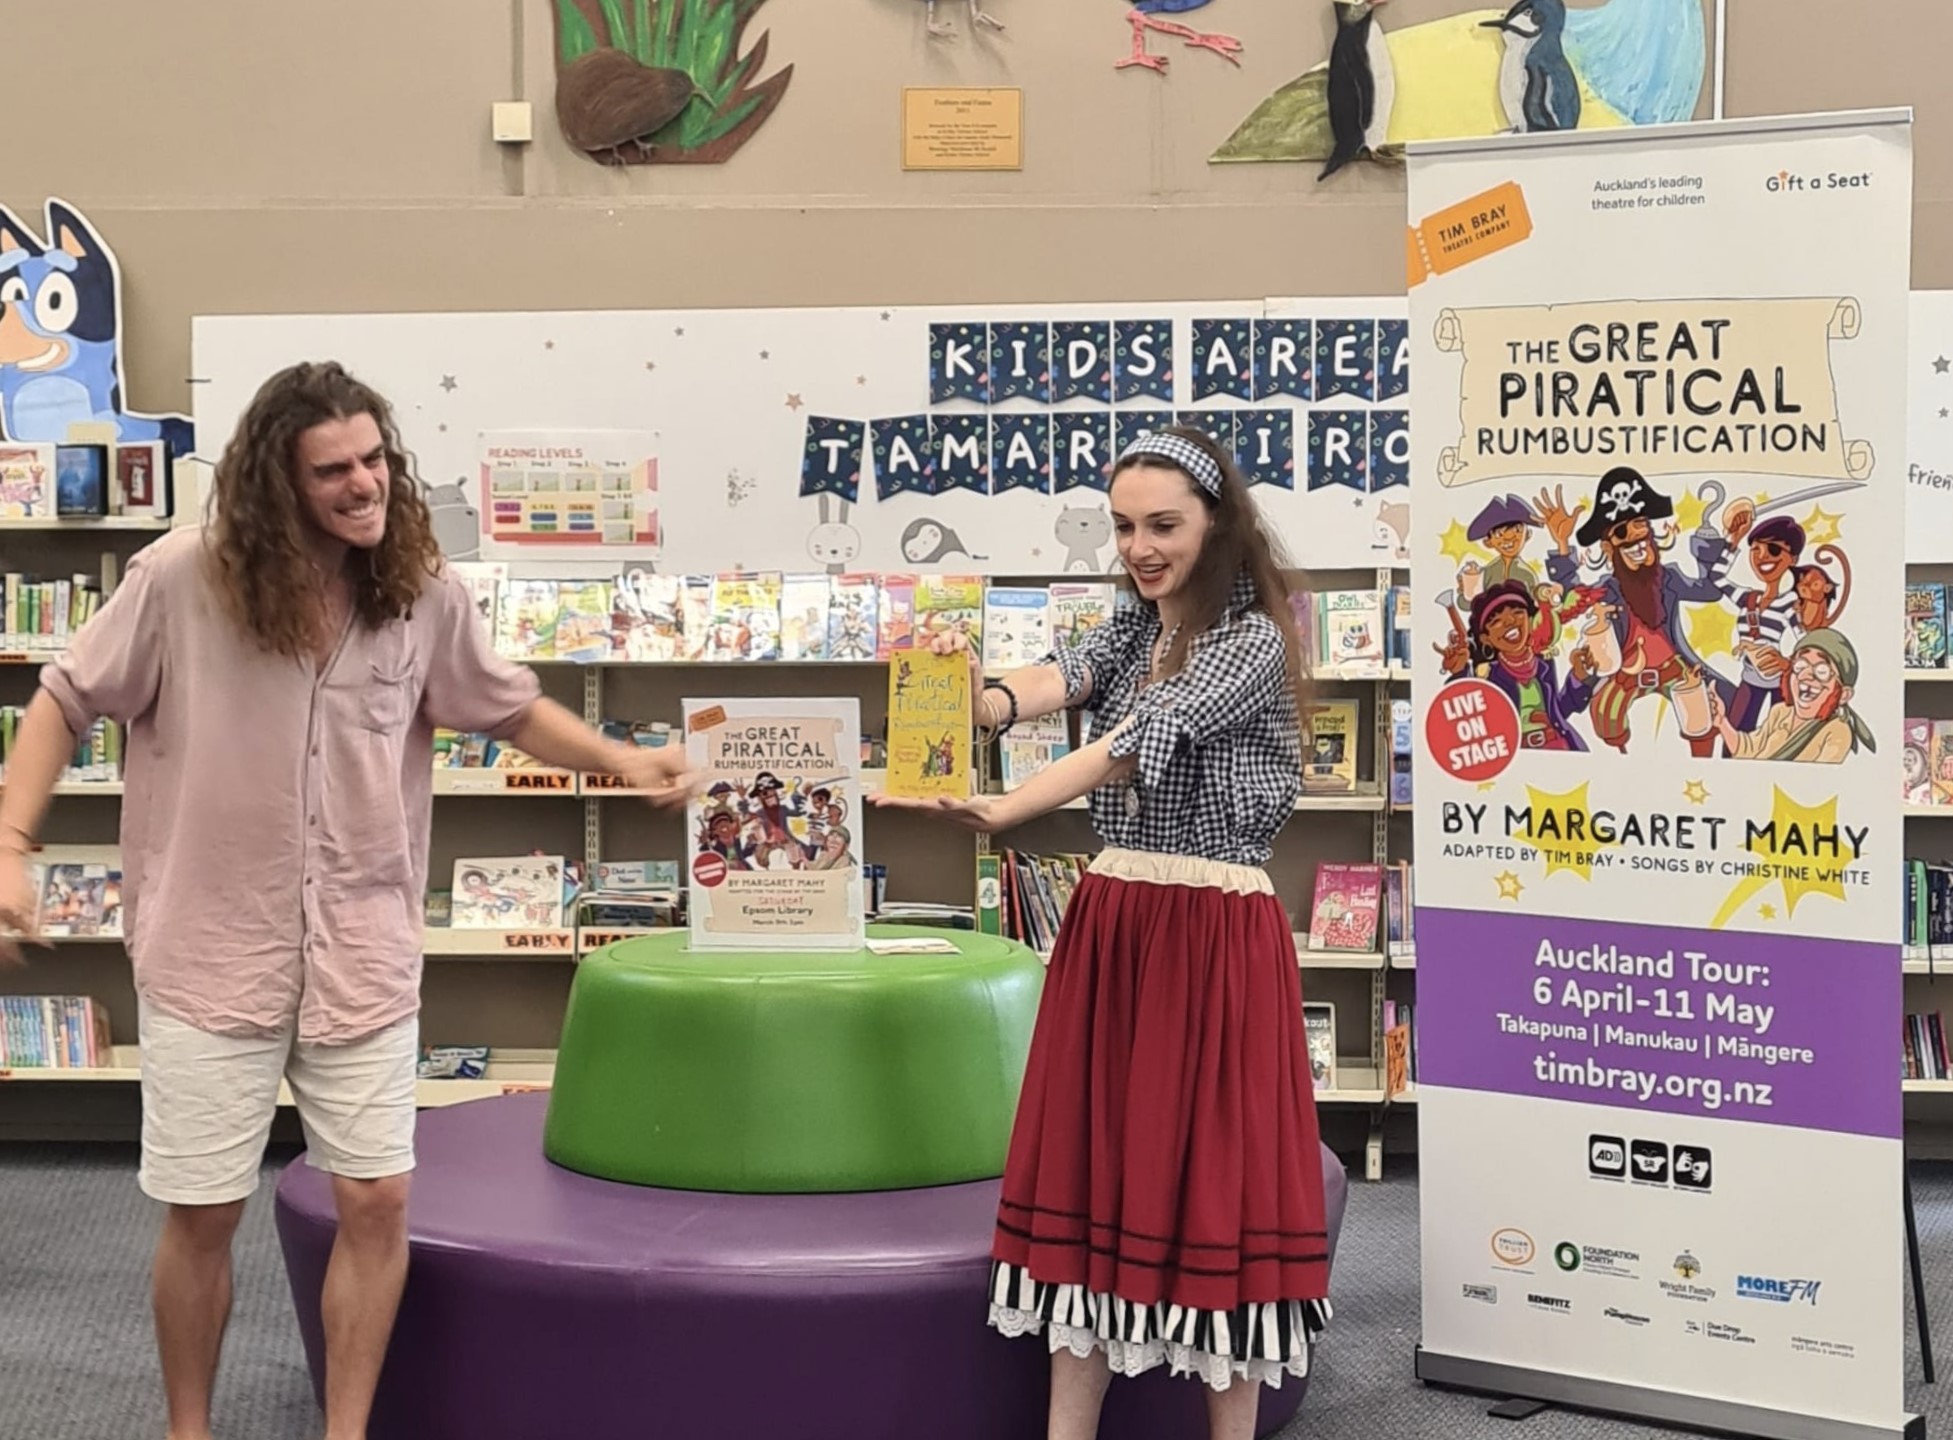 Tim Bray Theatre Co at an Auckland Library